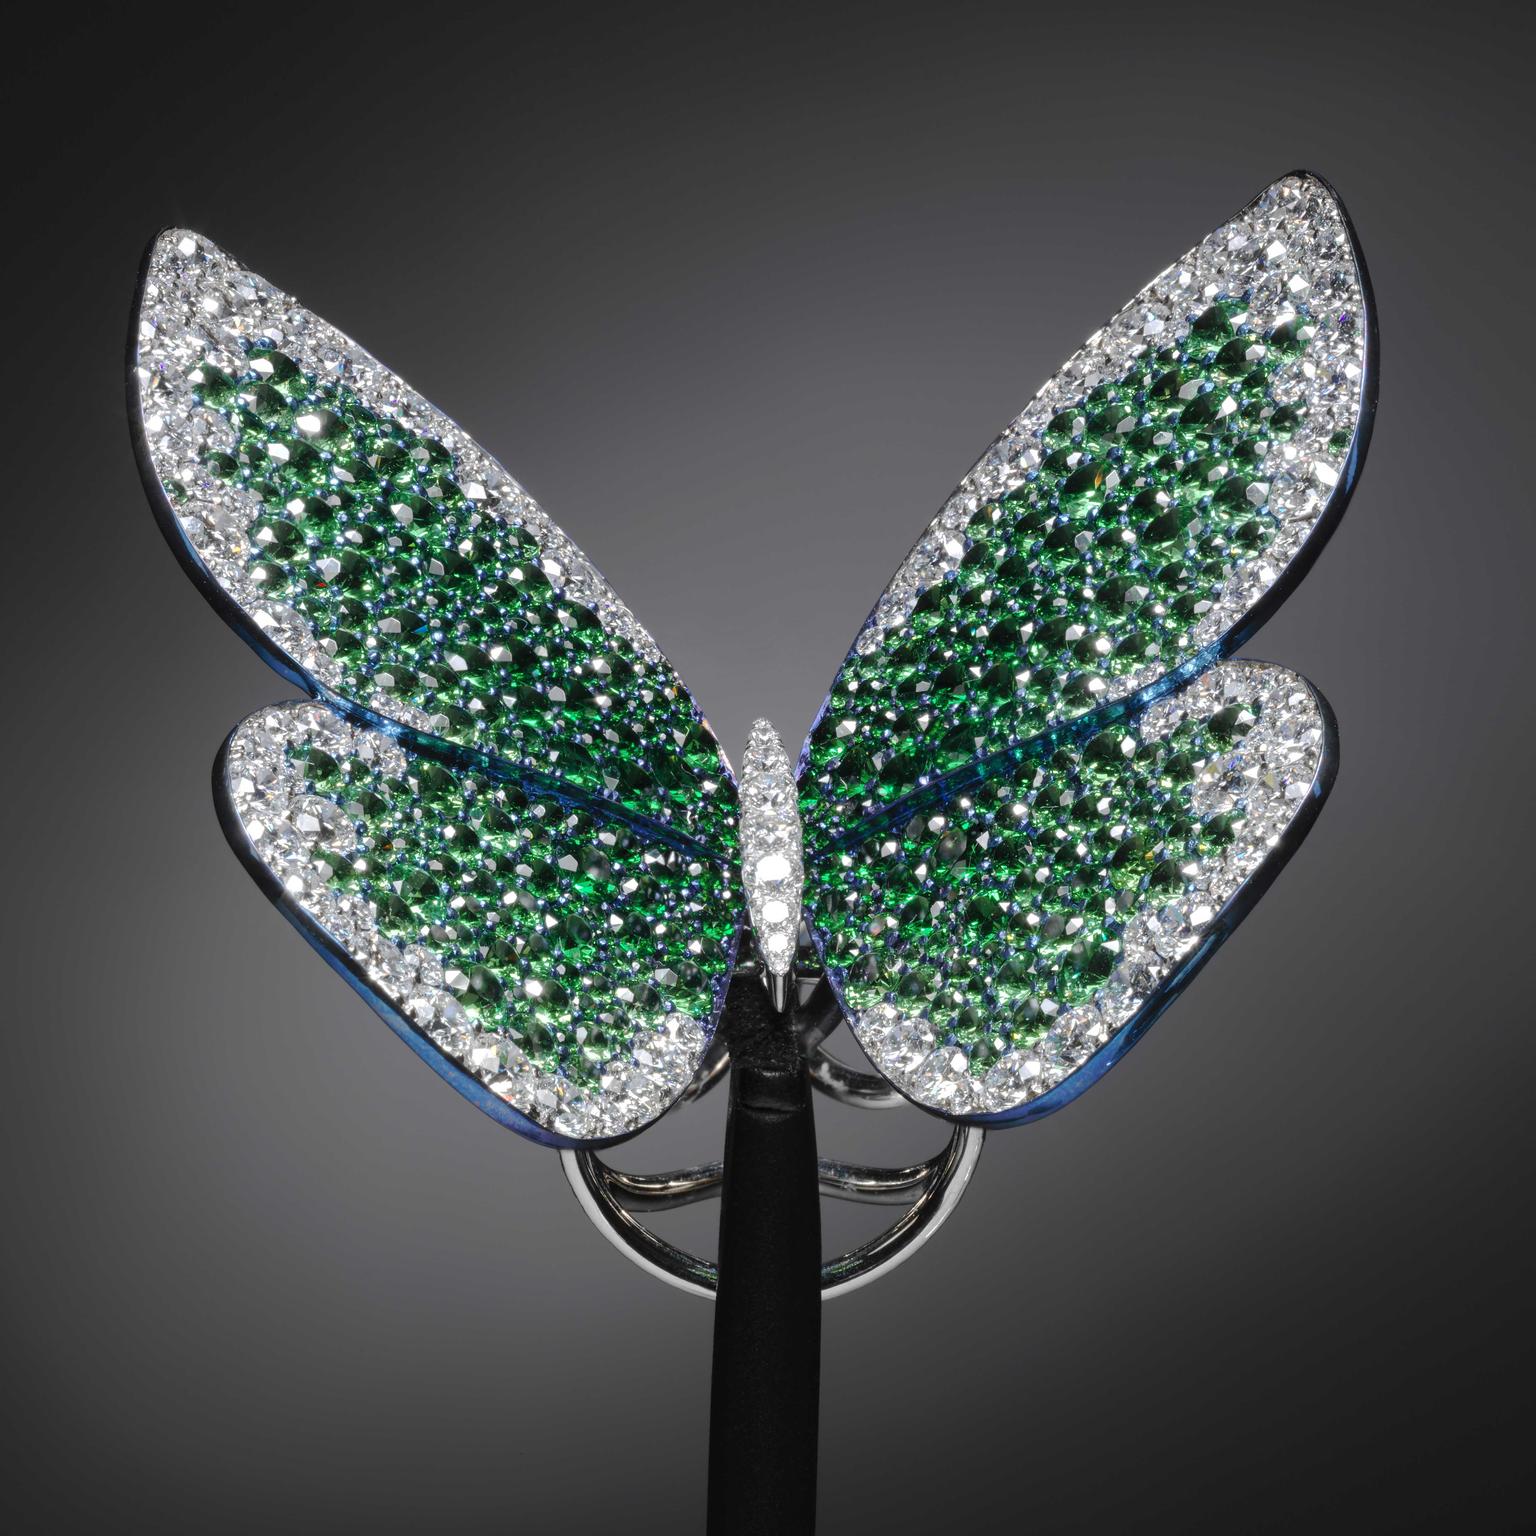 Papillon ring by G Glenn Spiro that Beyonce has donated to V and A museum in London